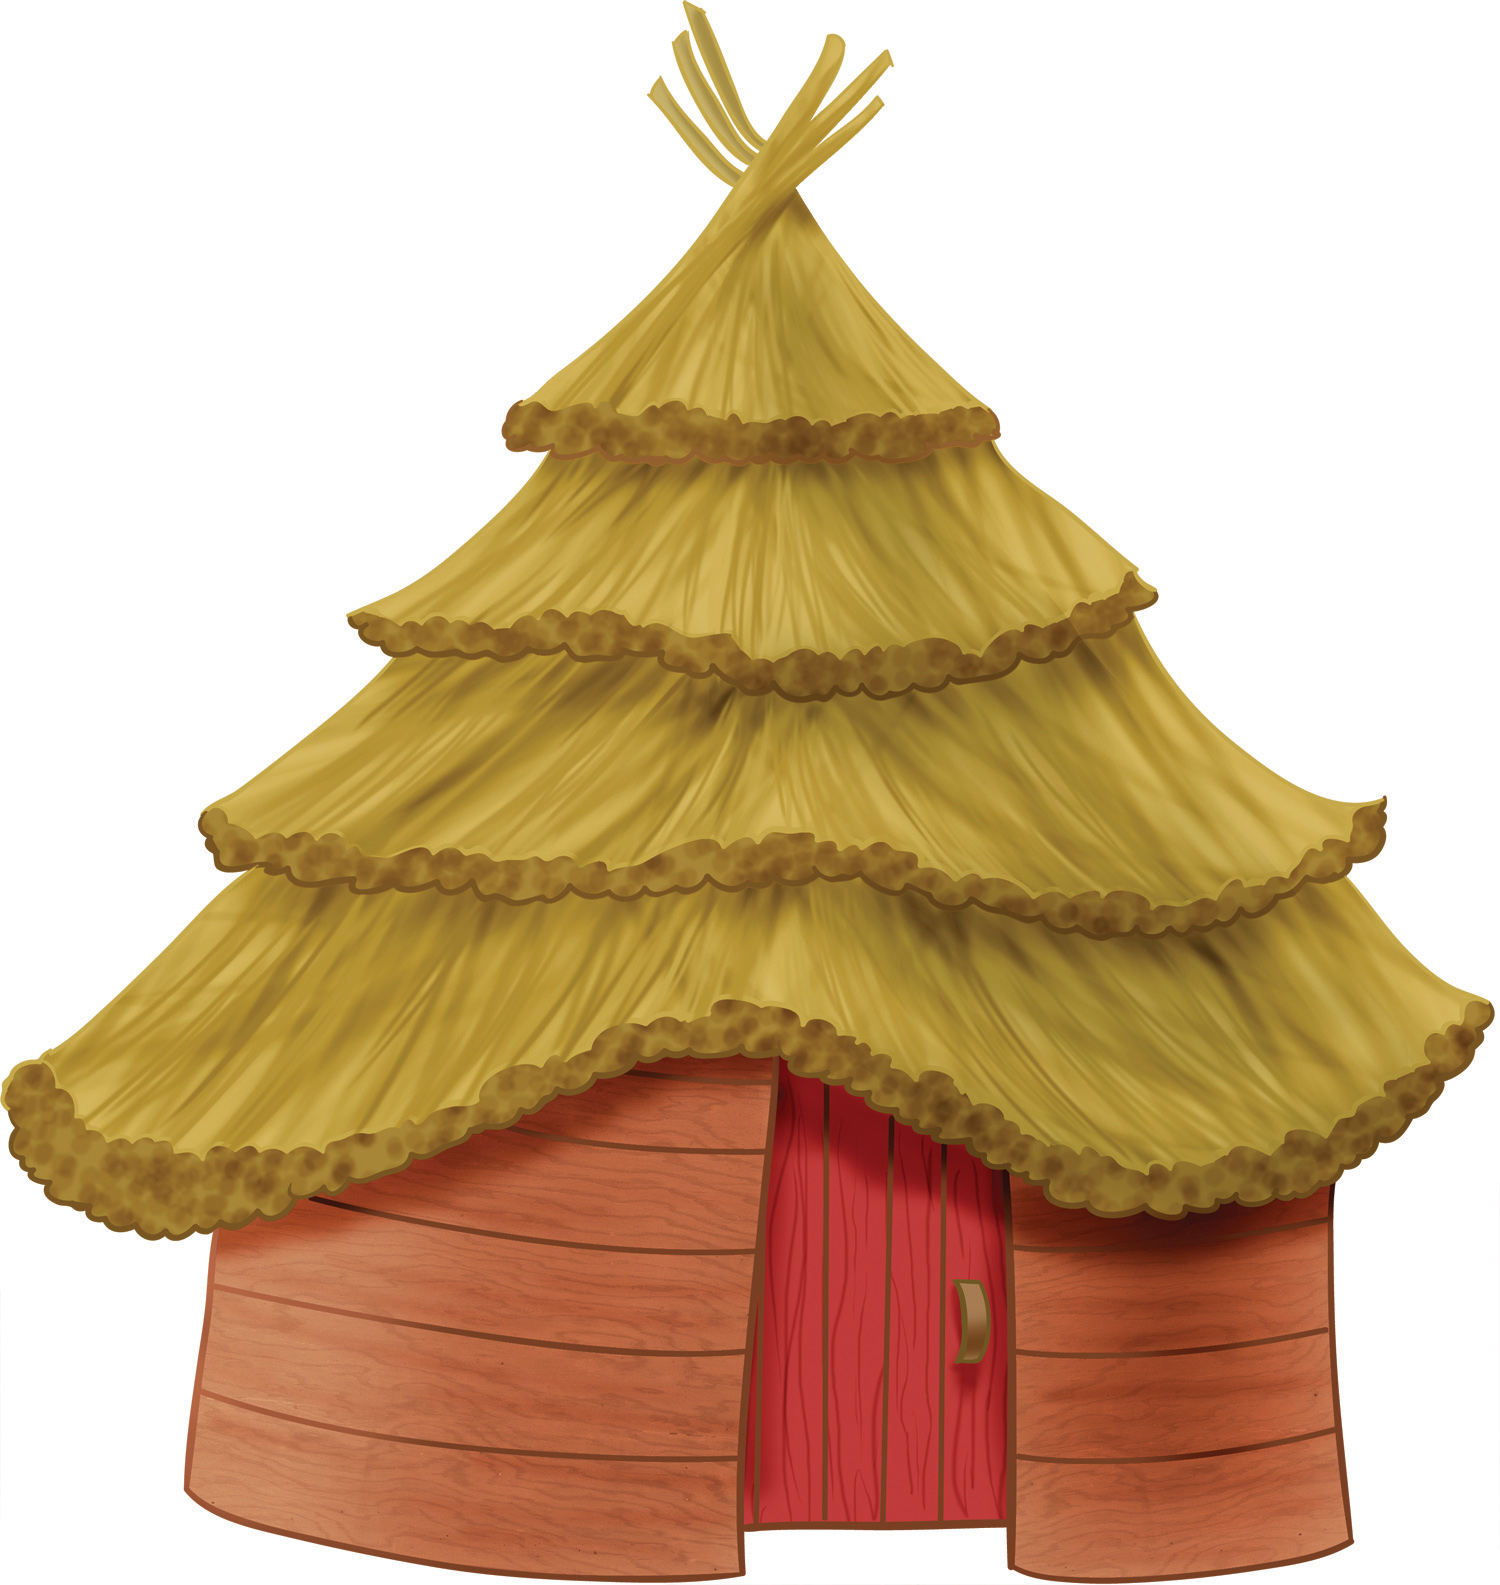 clipart images of hut - photo #3